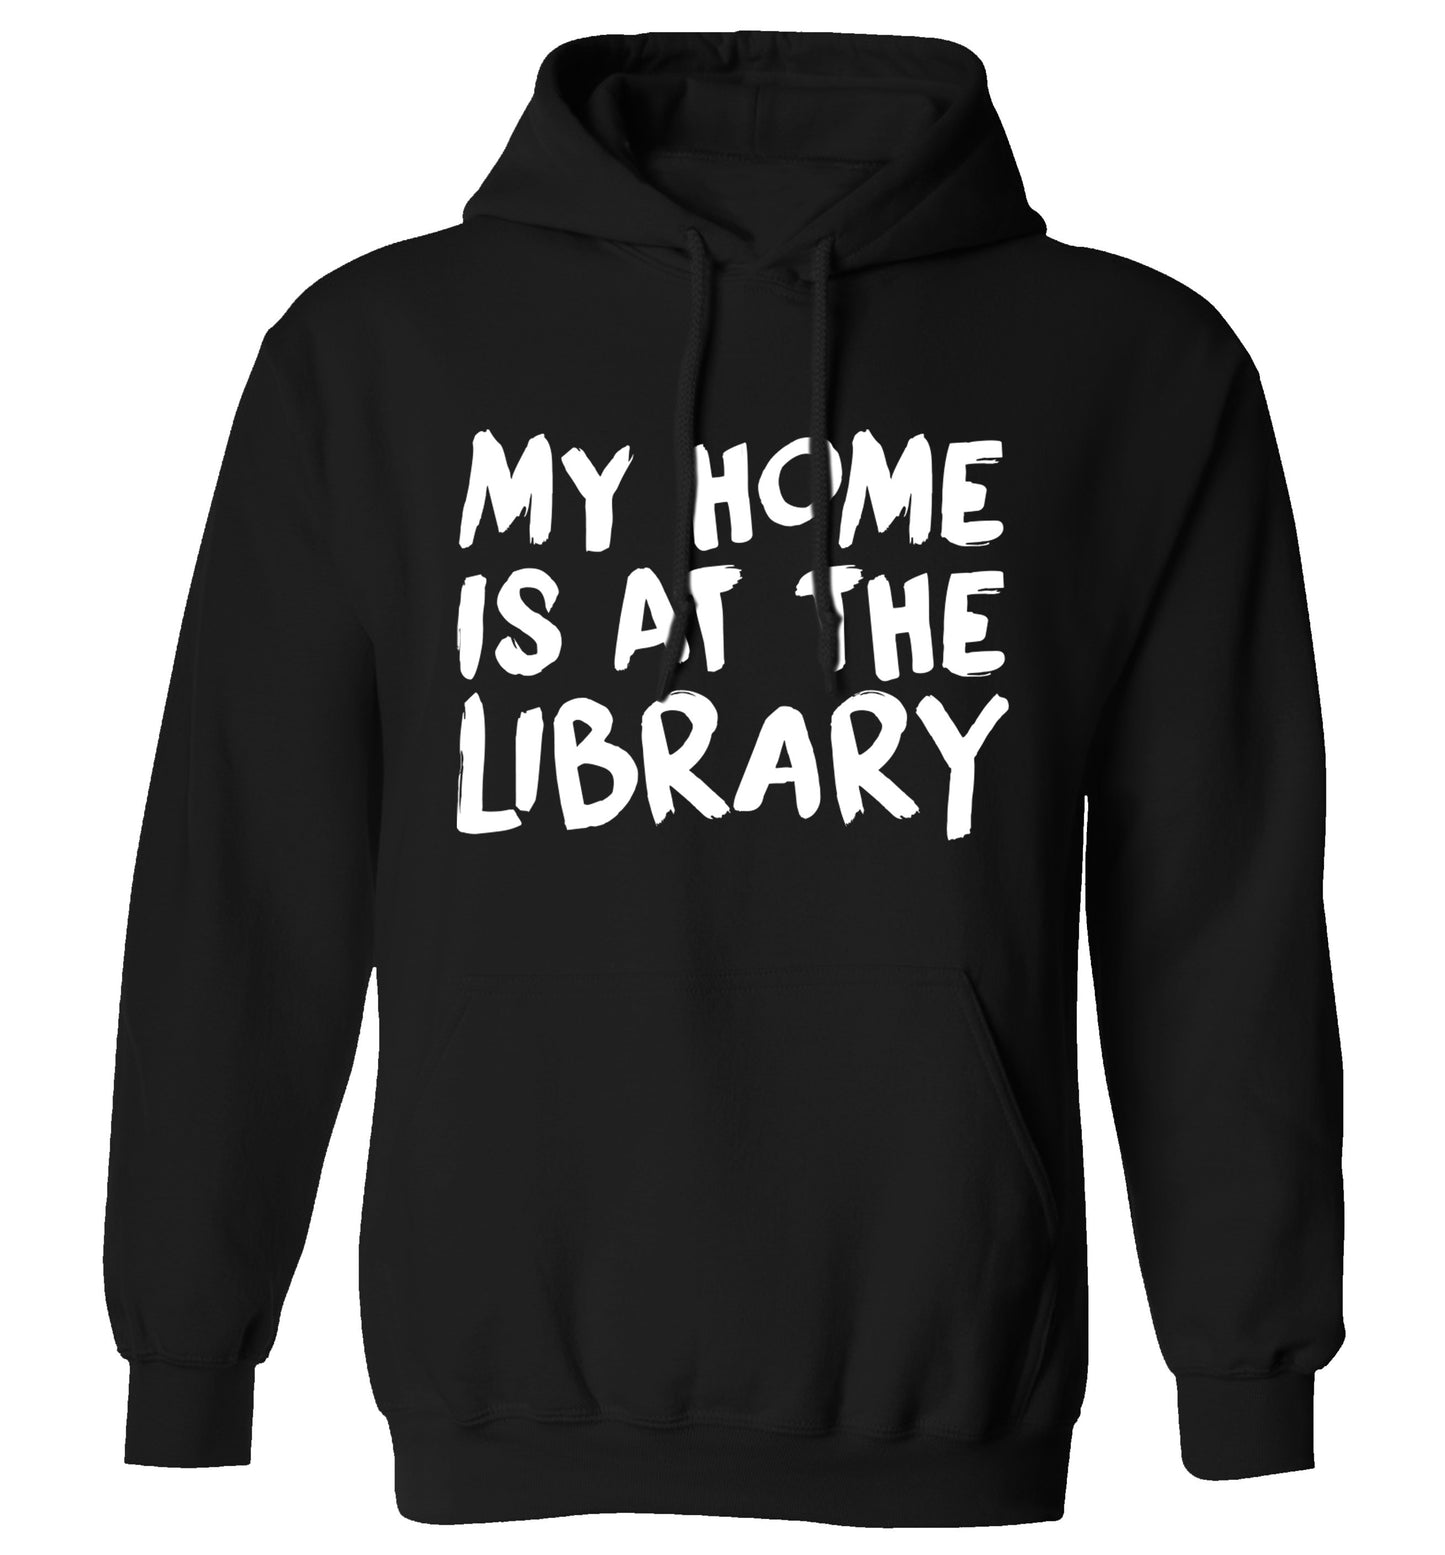 My home is at the library adults unisex black hoodie 2XL